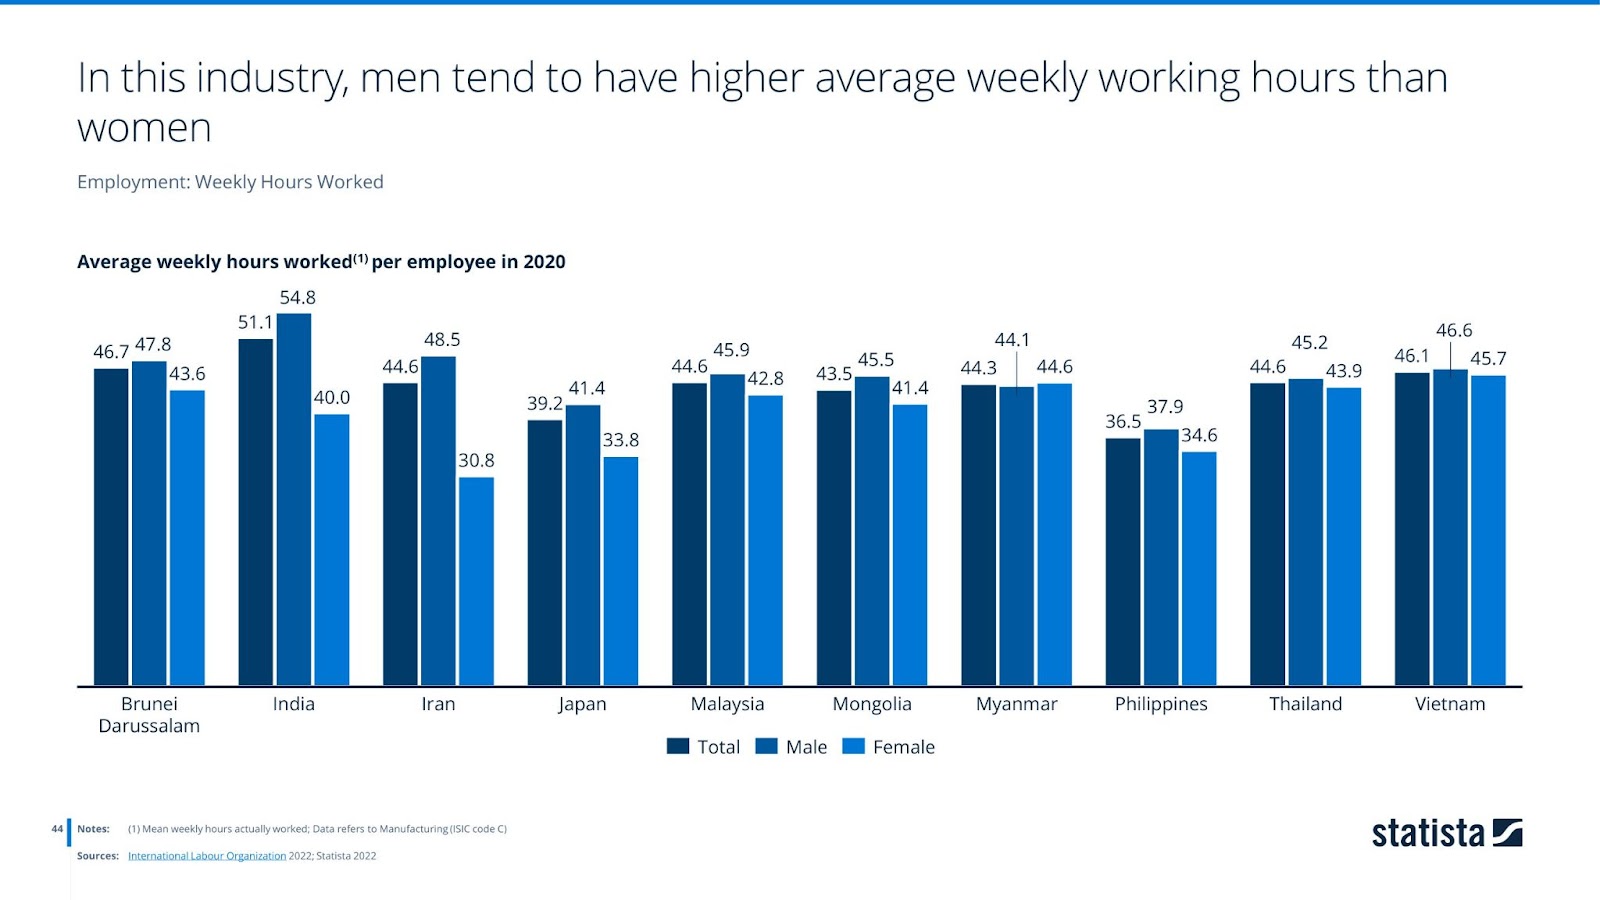 Average weekly hours worked per employee in 2020